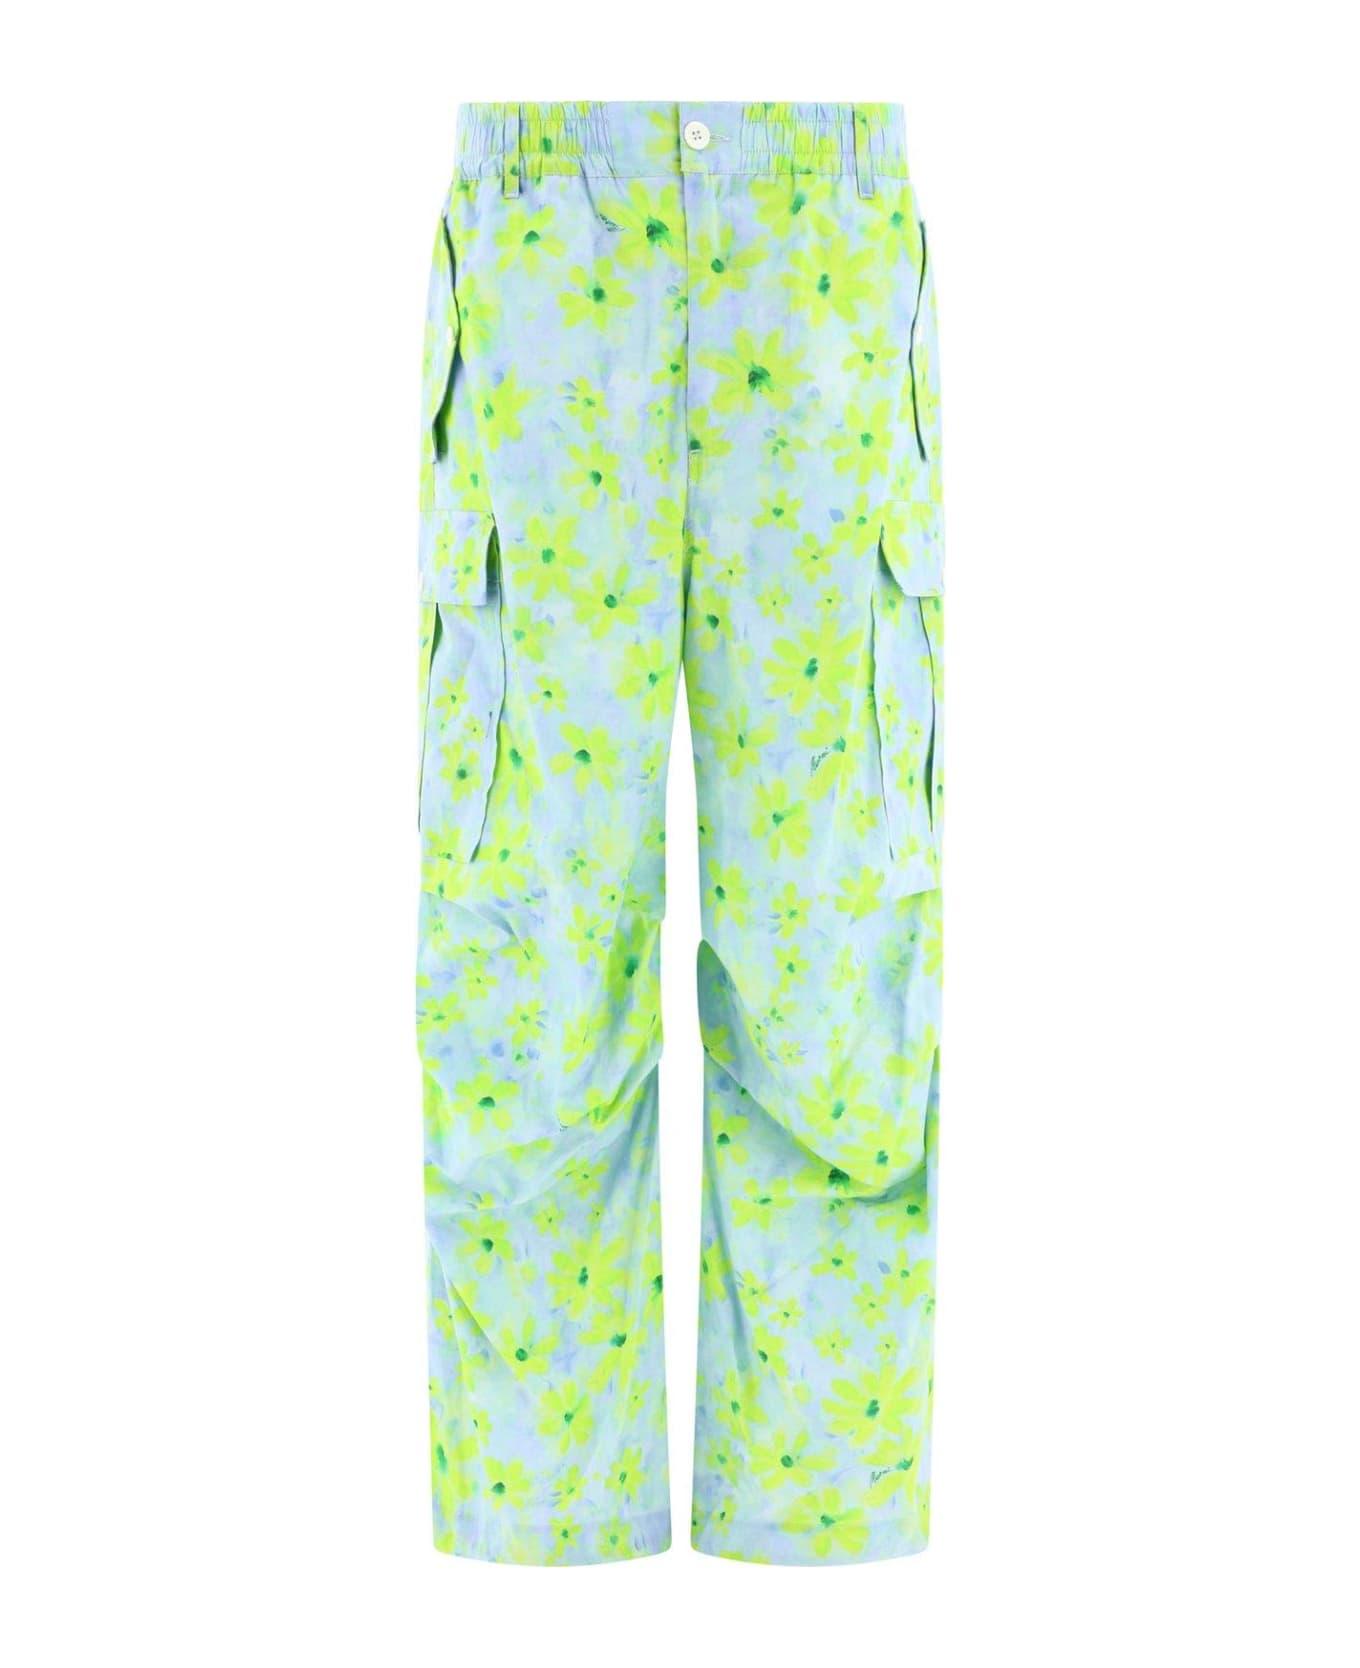 Marni Floral Printed Relaxed Fit Cargo Trousers - Water ボトムス